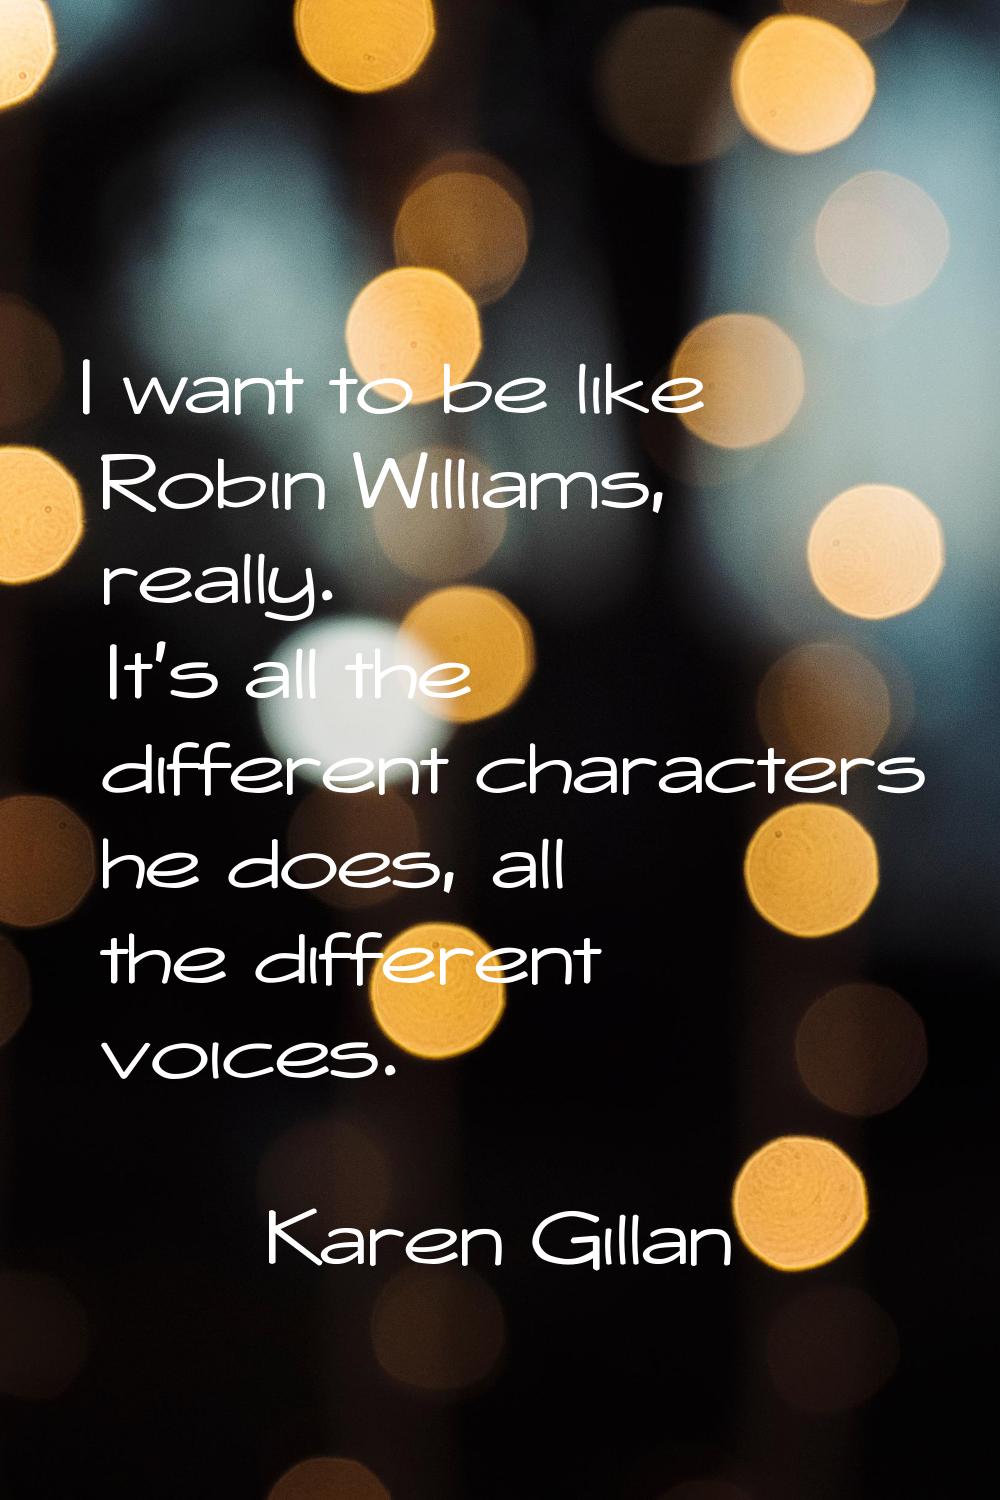 I want to be like Robin Williams, really. It's all the different characters he does, all the differ